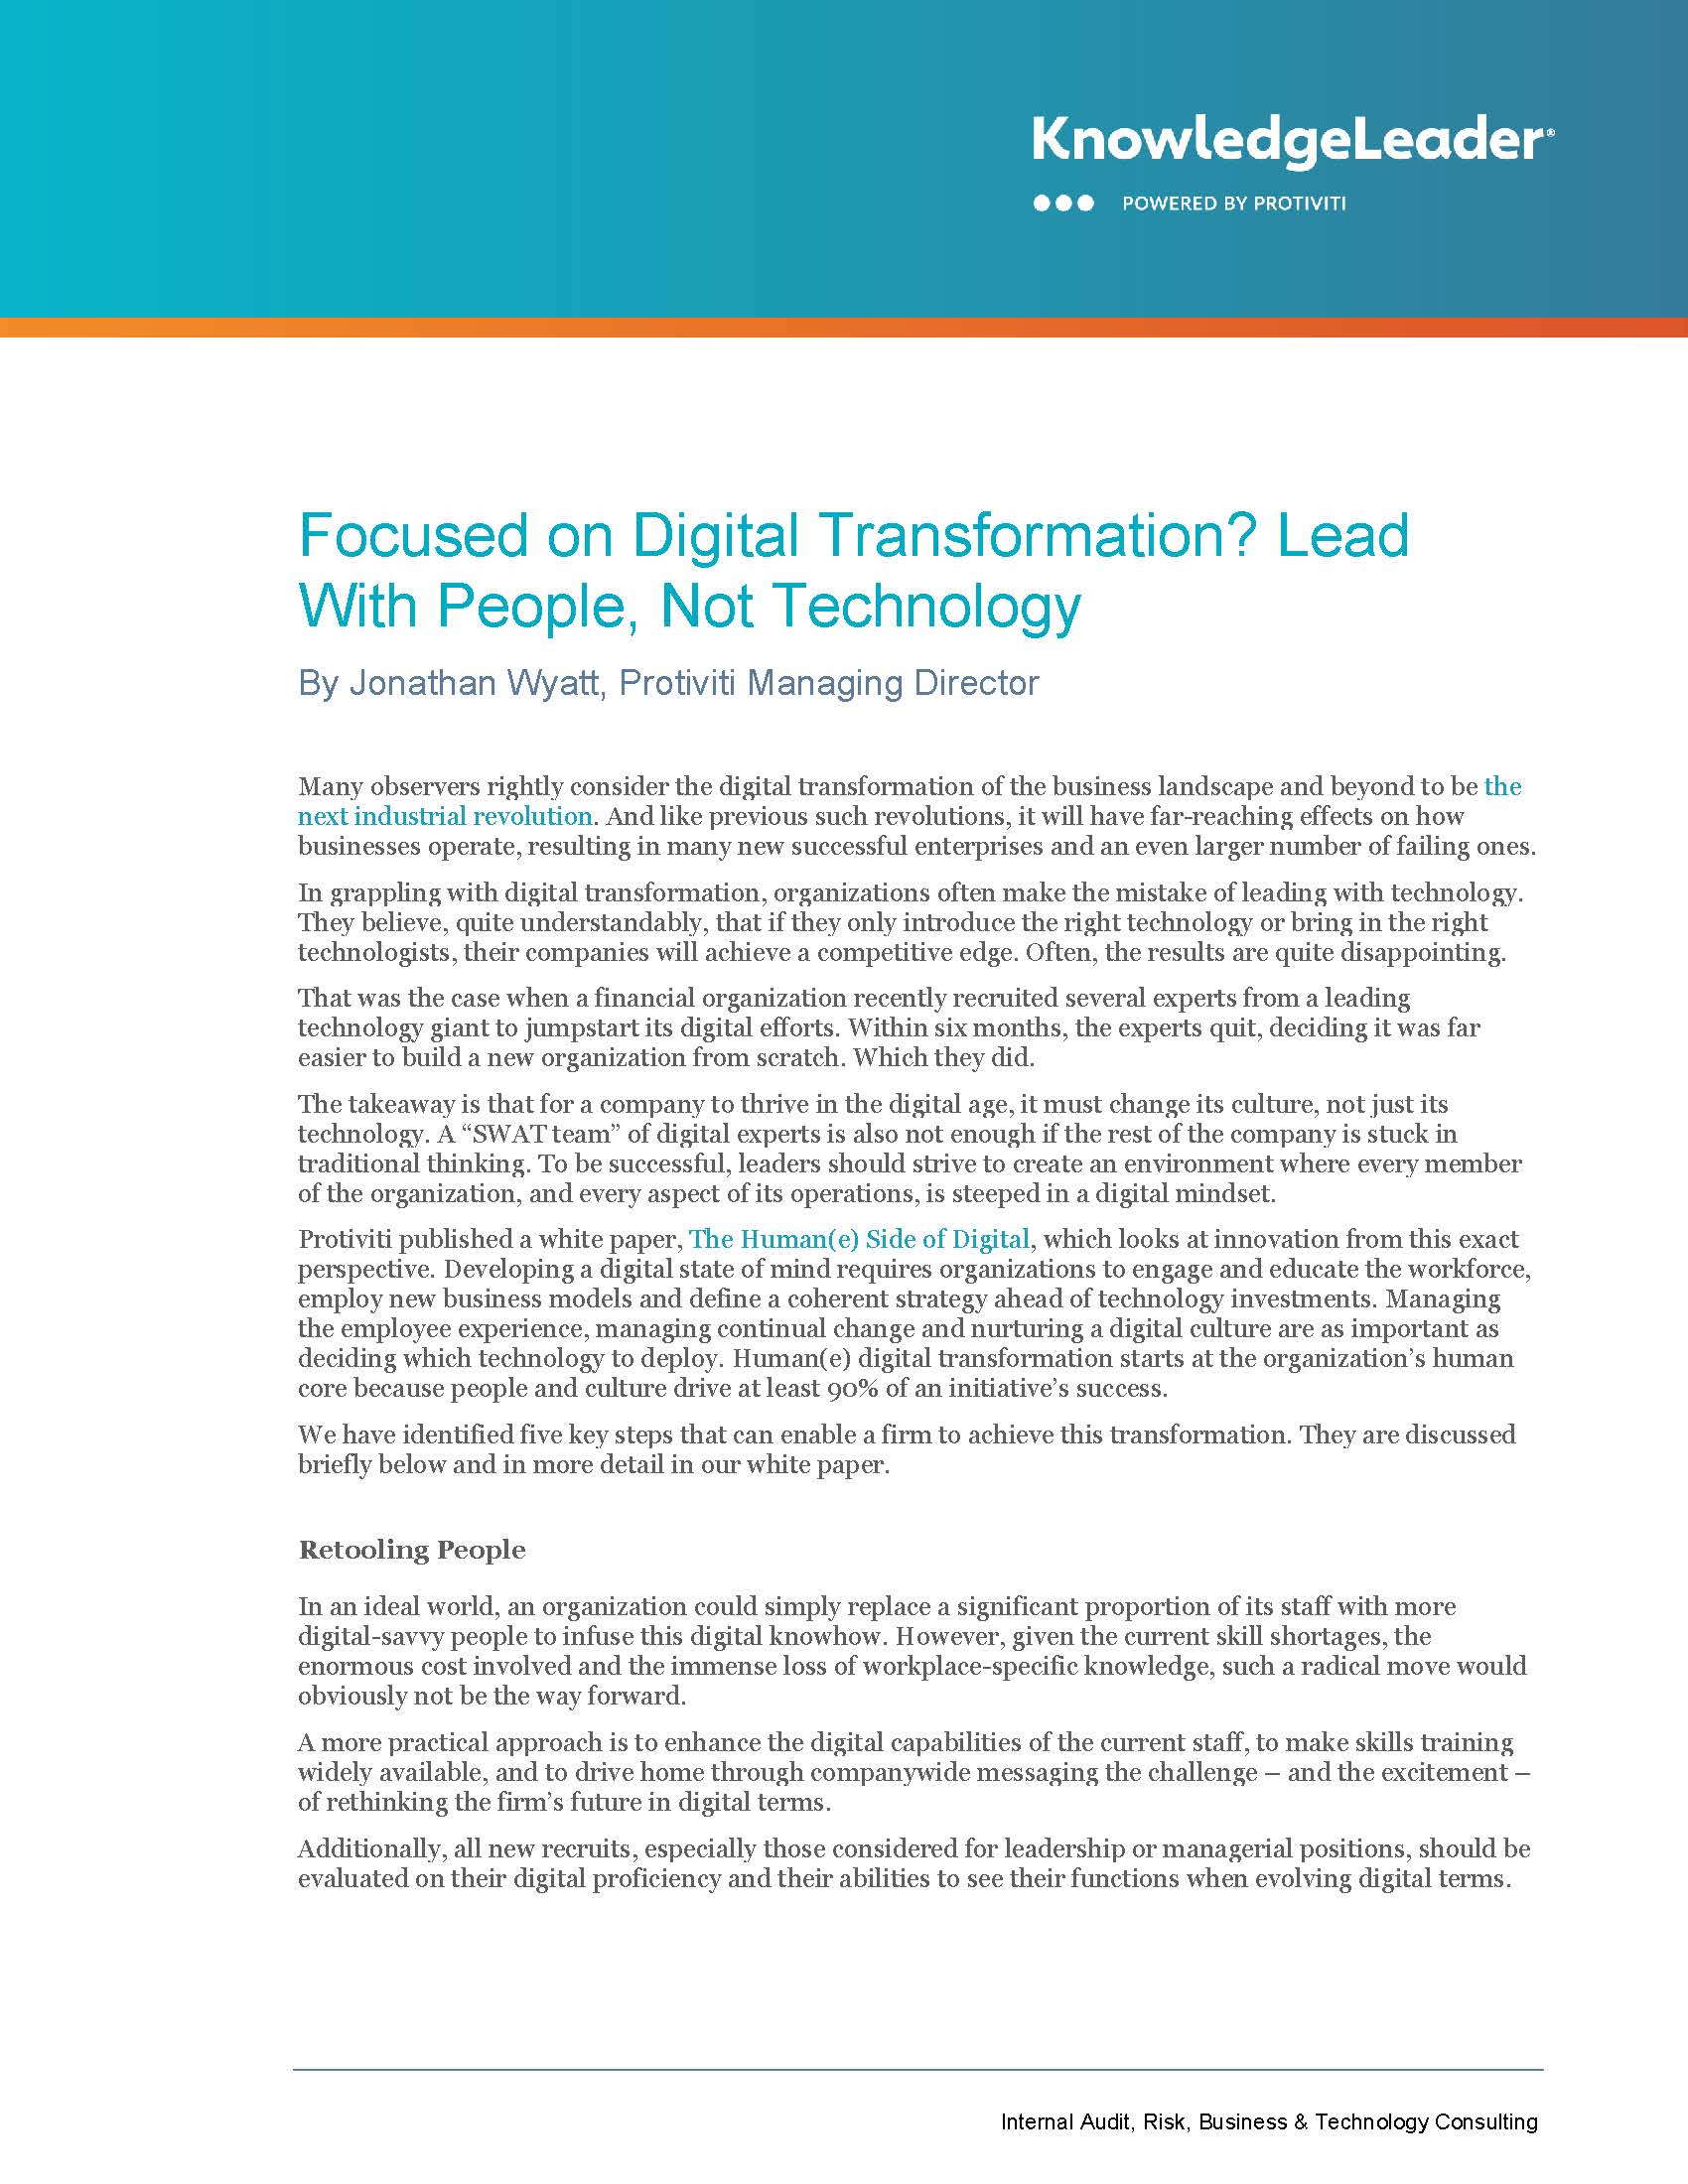 Screenshot of the first page of Focused on Digital Transformation Lead With People, Not Technology